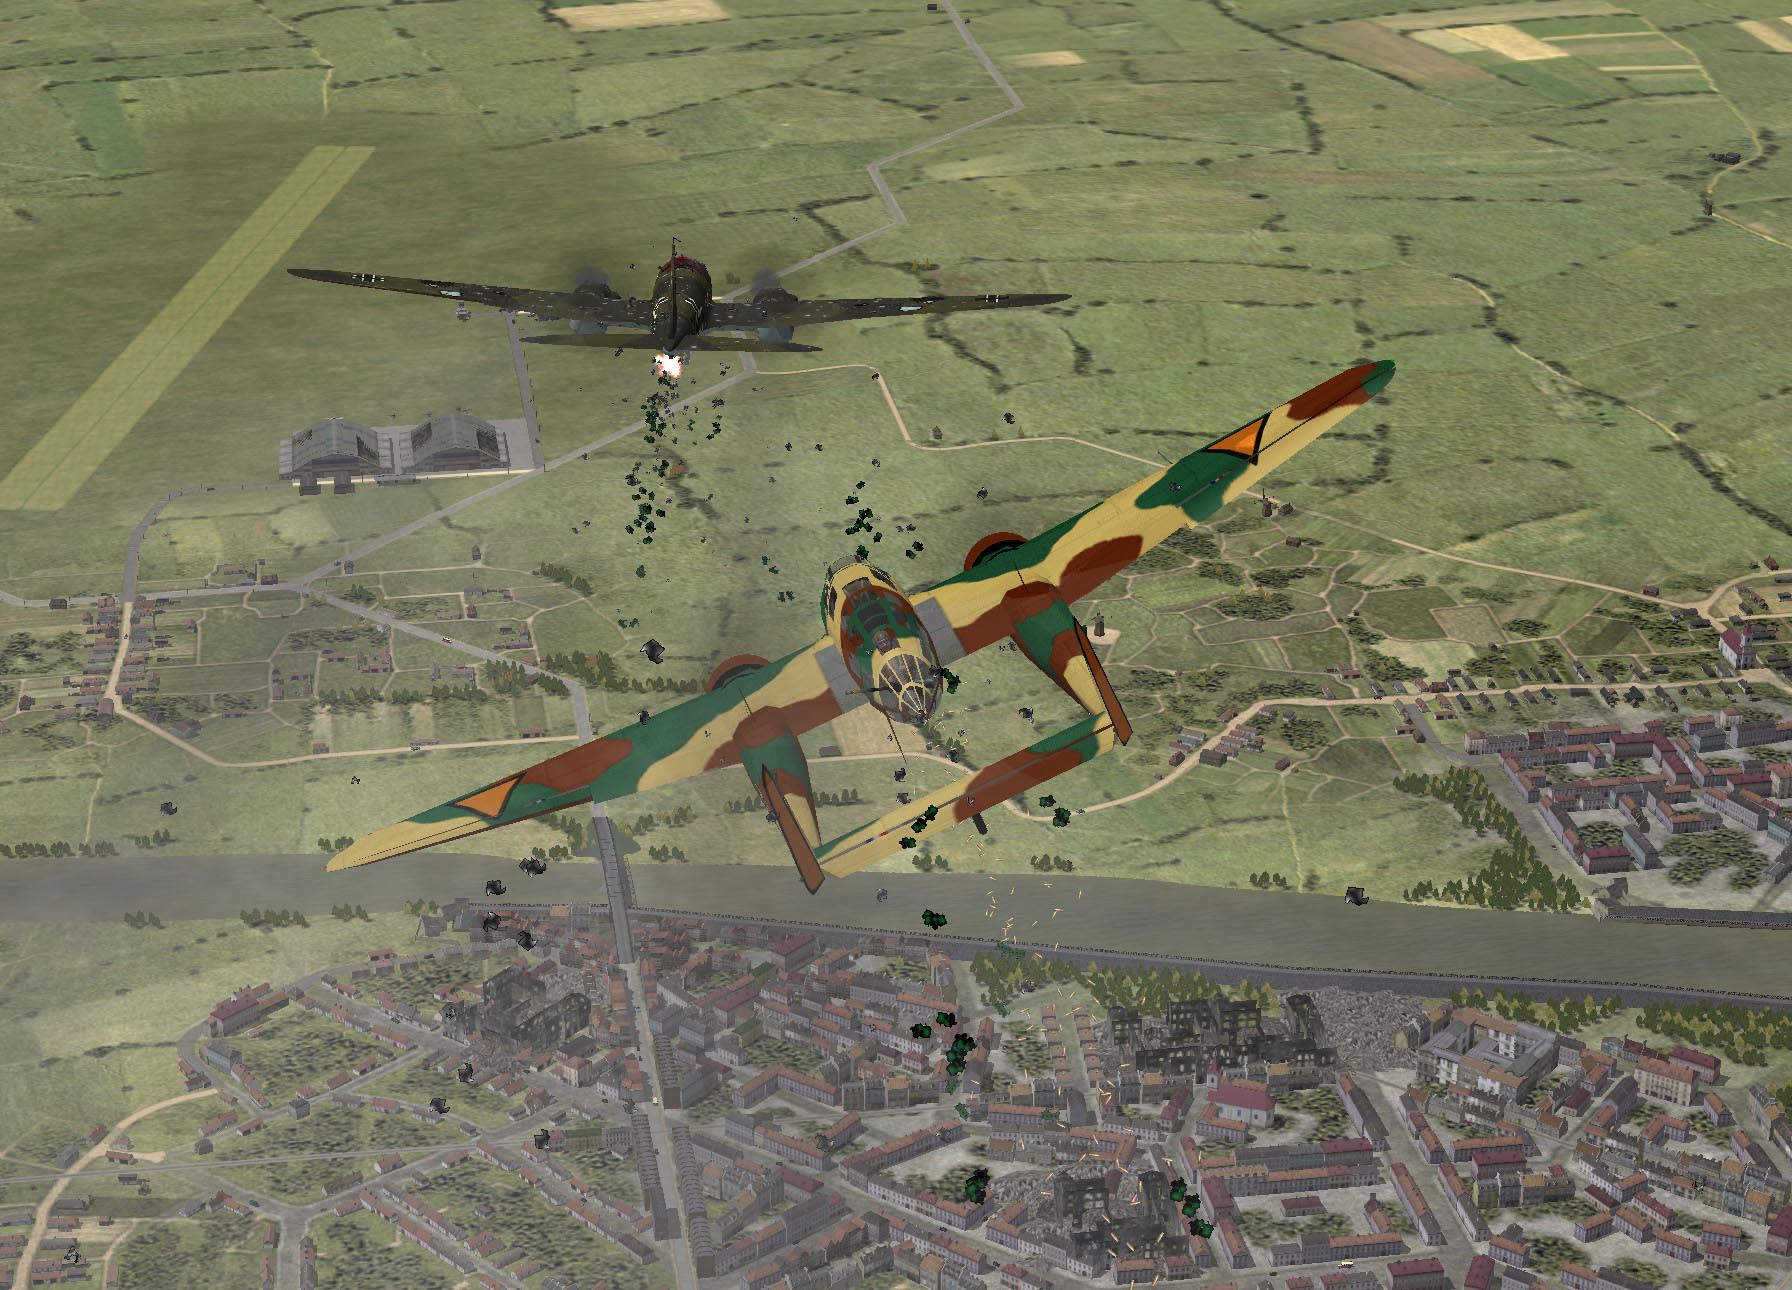 Netherlands may 1940 Fokker G1 against He 111 bombers